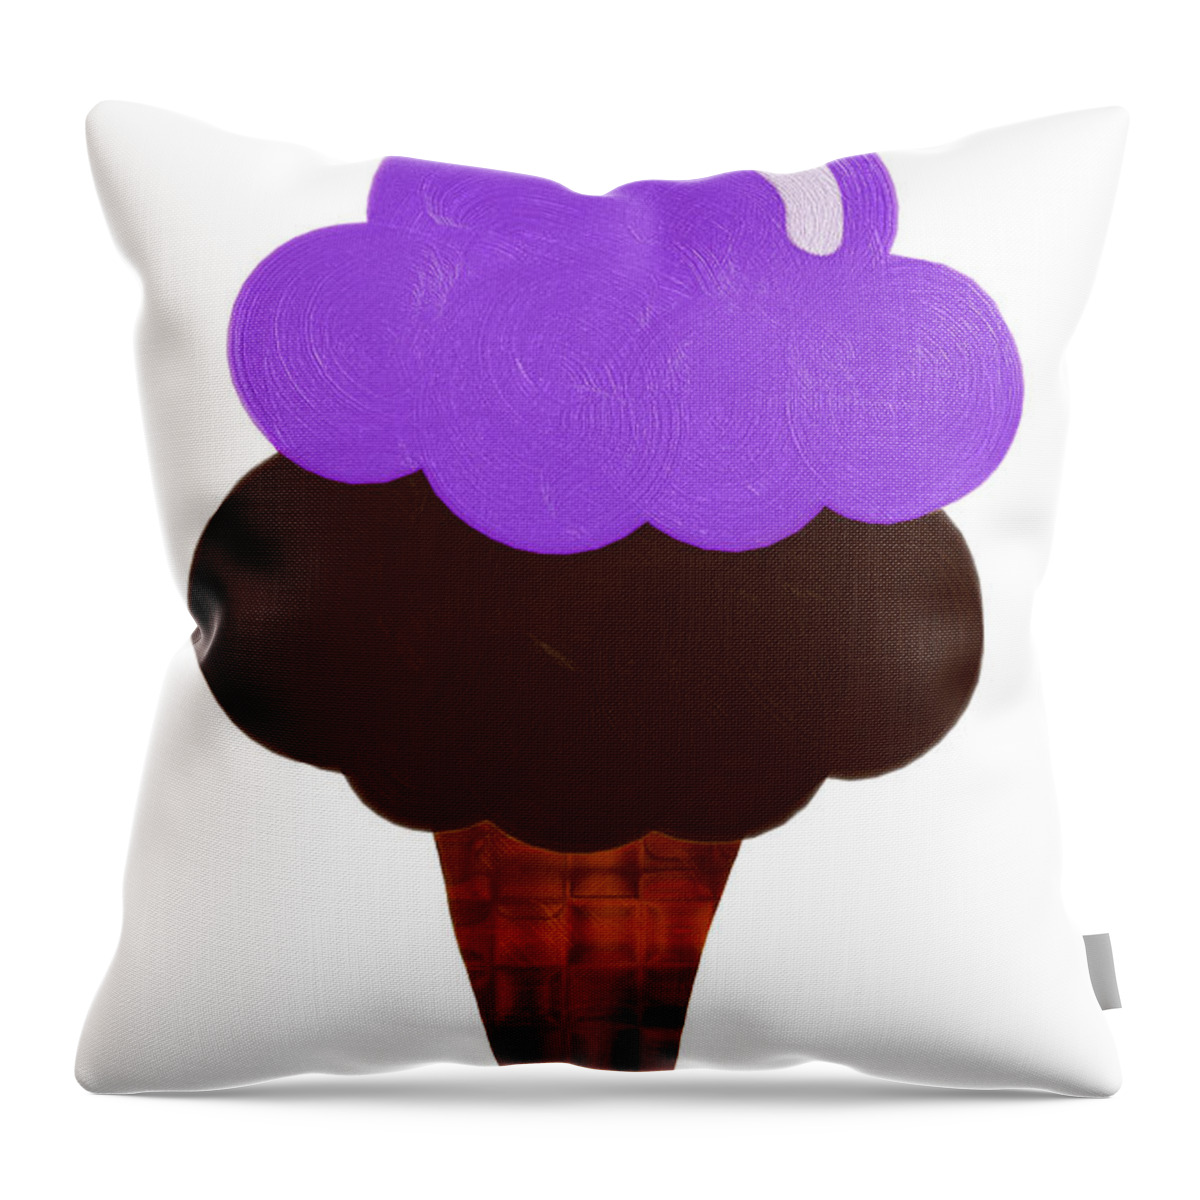 Food Throw Pillow featuring the digital art Grape And Chocolate Ice Cream by Andee Design